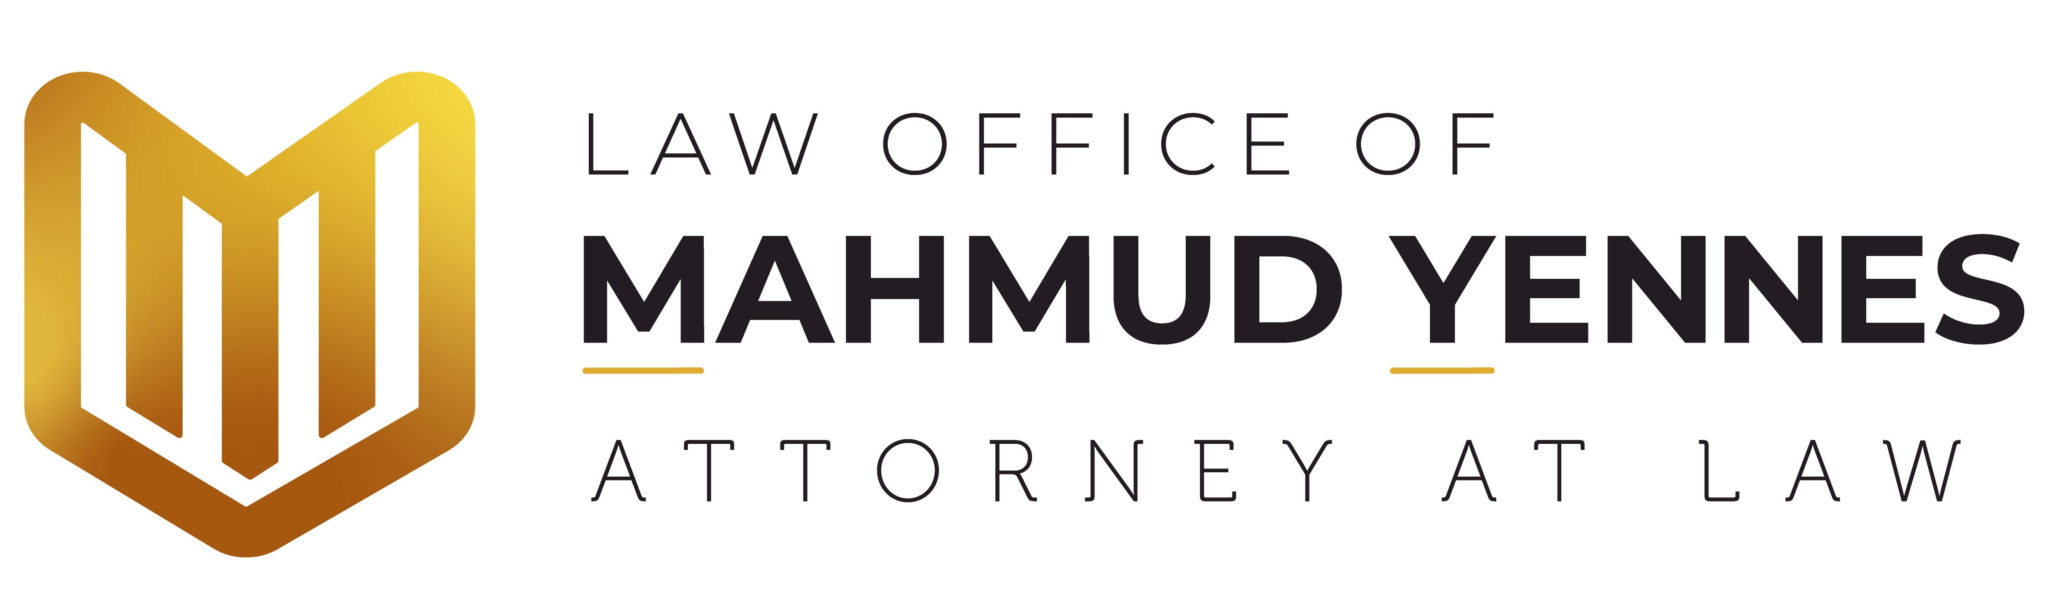 Tampa Law FIrm Logo for the Law Office of Mahmud Yennes